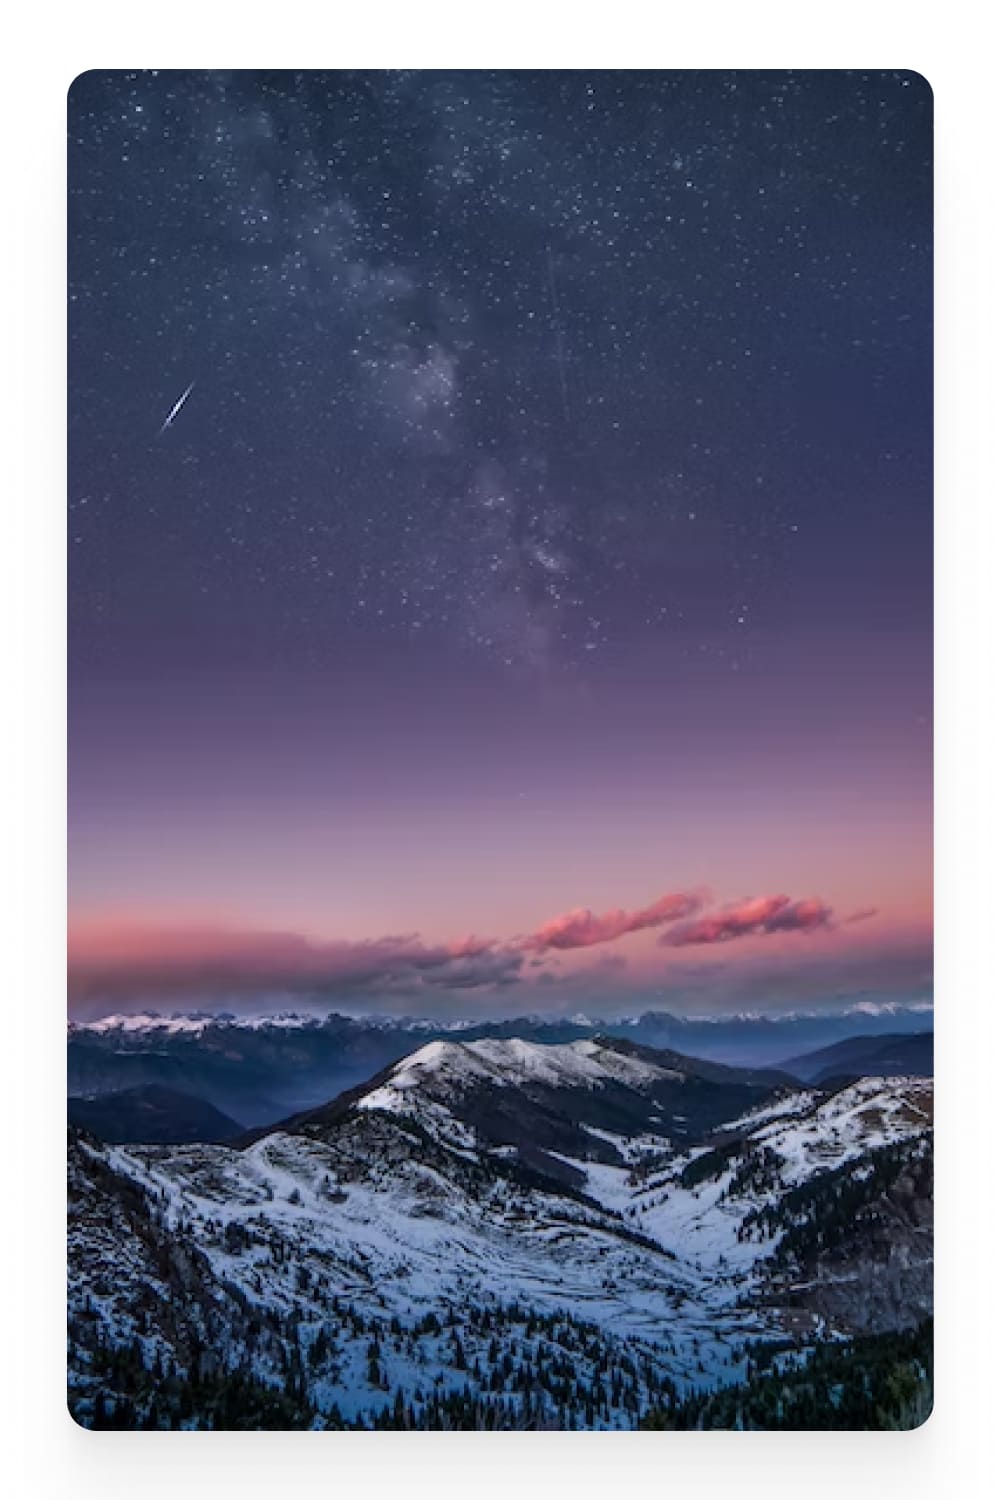 Photo of a snowy forest in the mountains against the background of a starry sky.